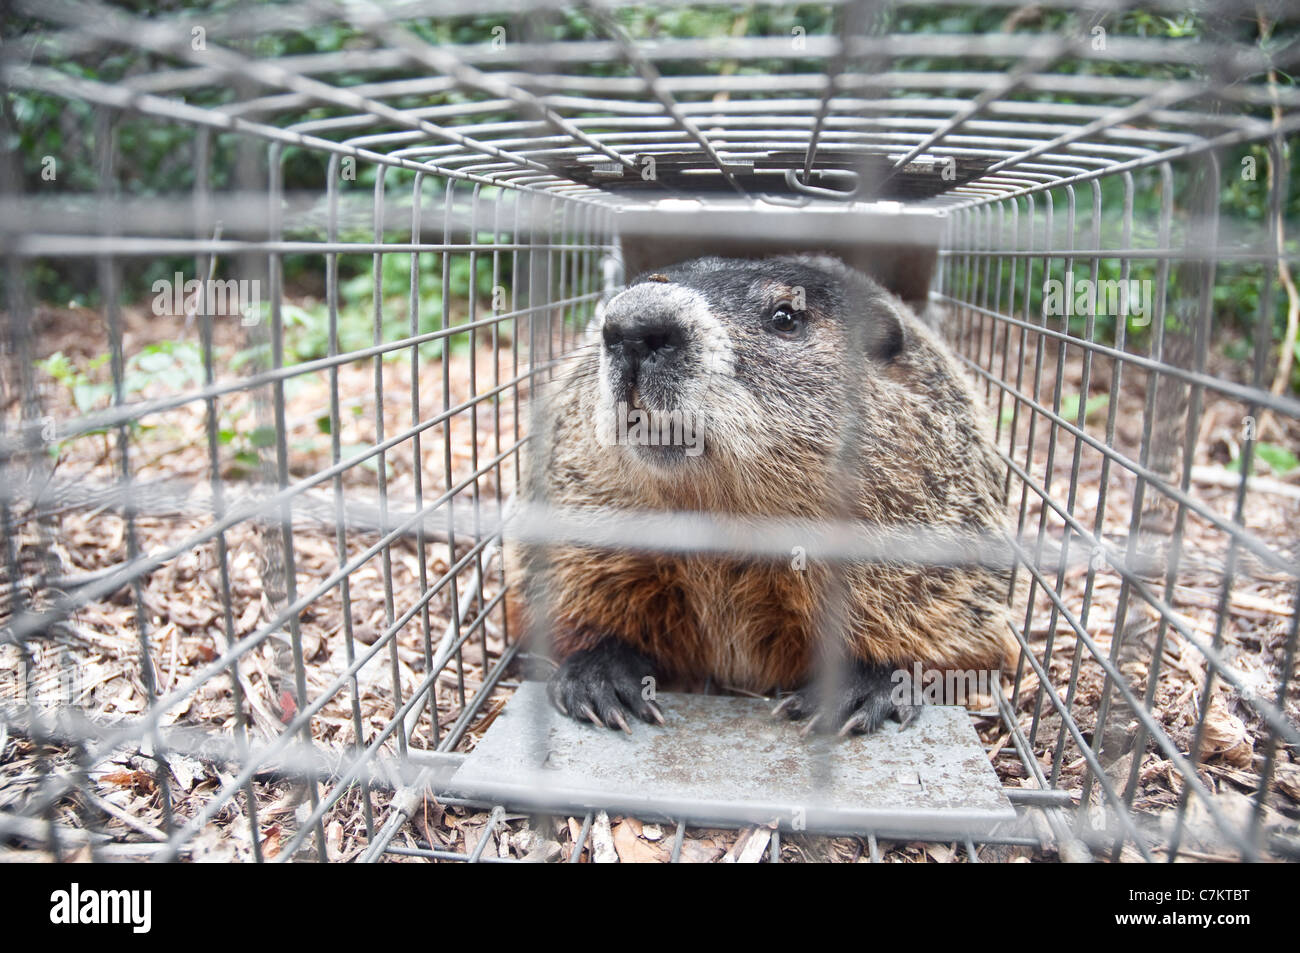 A large Groundhog or Woodchuck sitting in a humane / Have-A-Heart trap in a garden in New Jersey, USA. Stock Photo